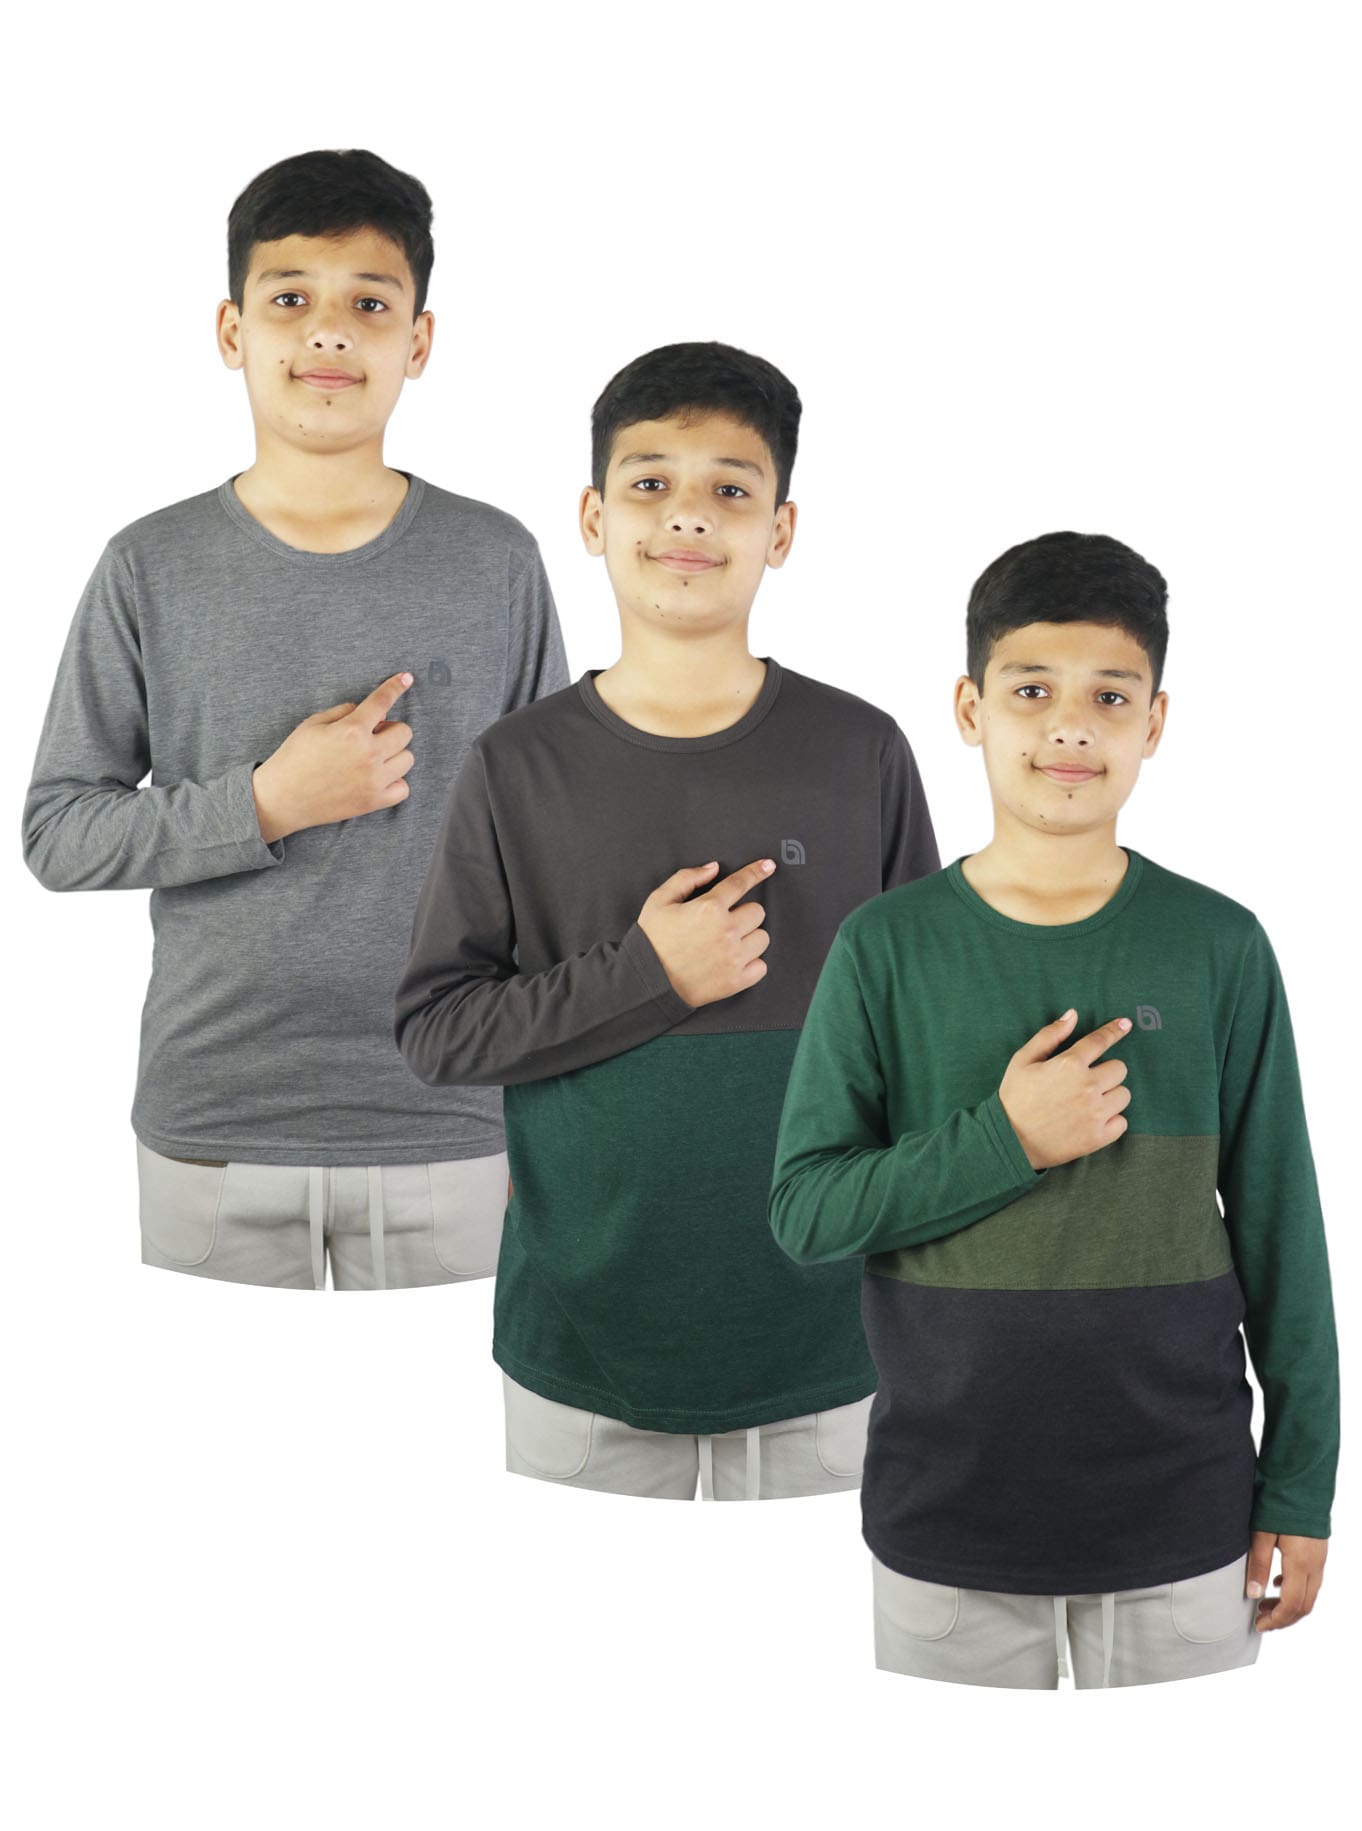 Bahob® 3 Pack Boys Long Sleeved Round Neck T Shirts Soft Cotton Top. - Bahob